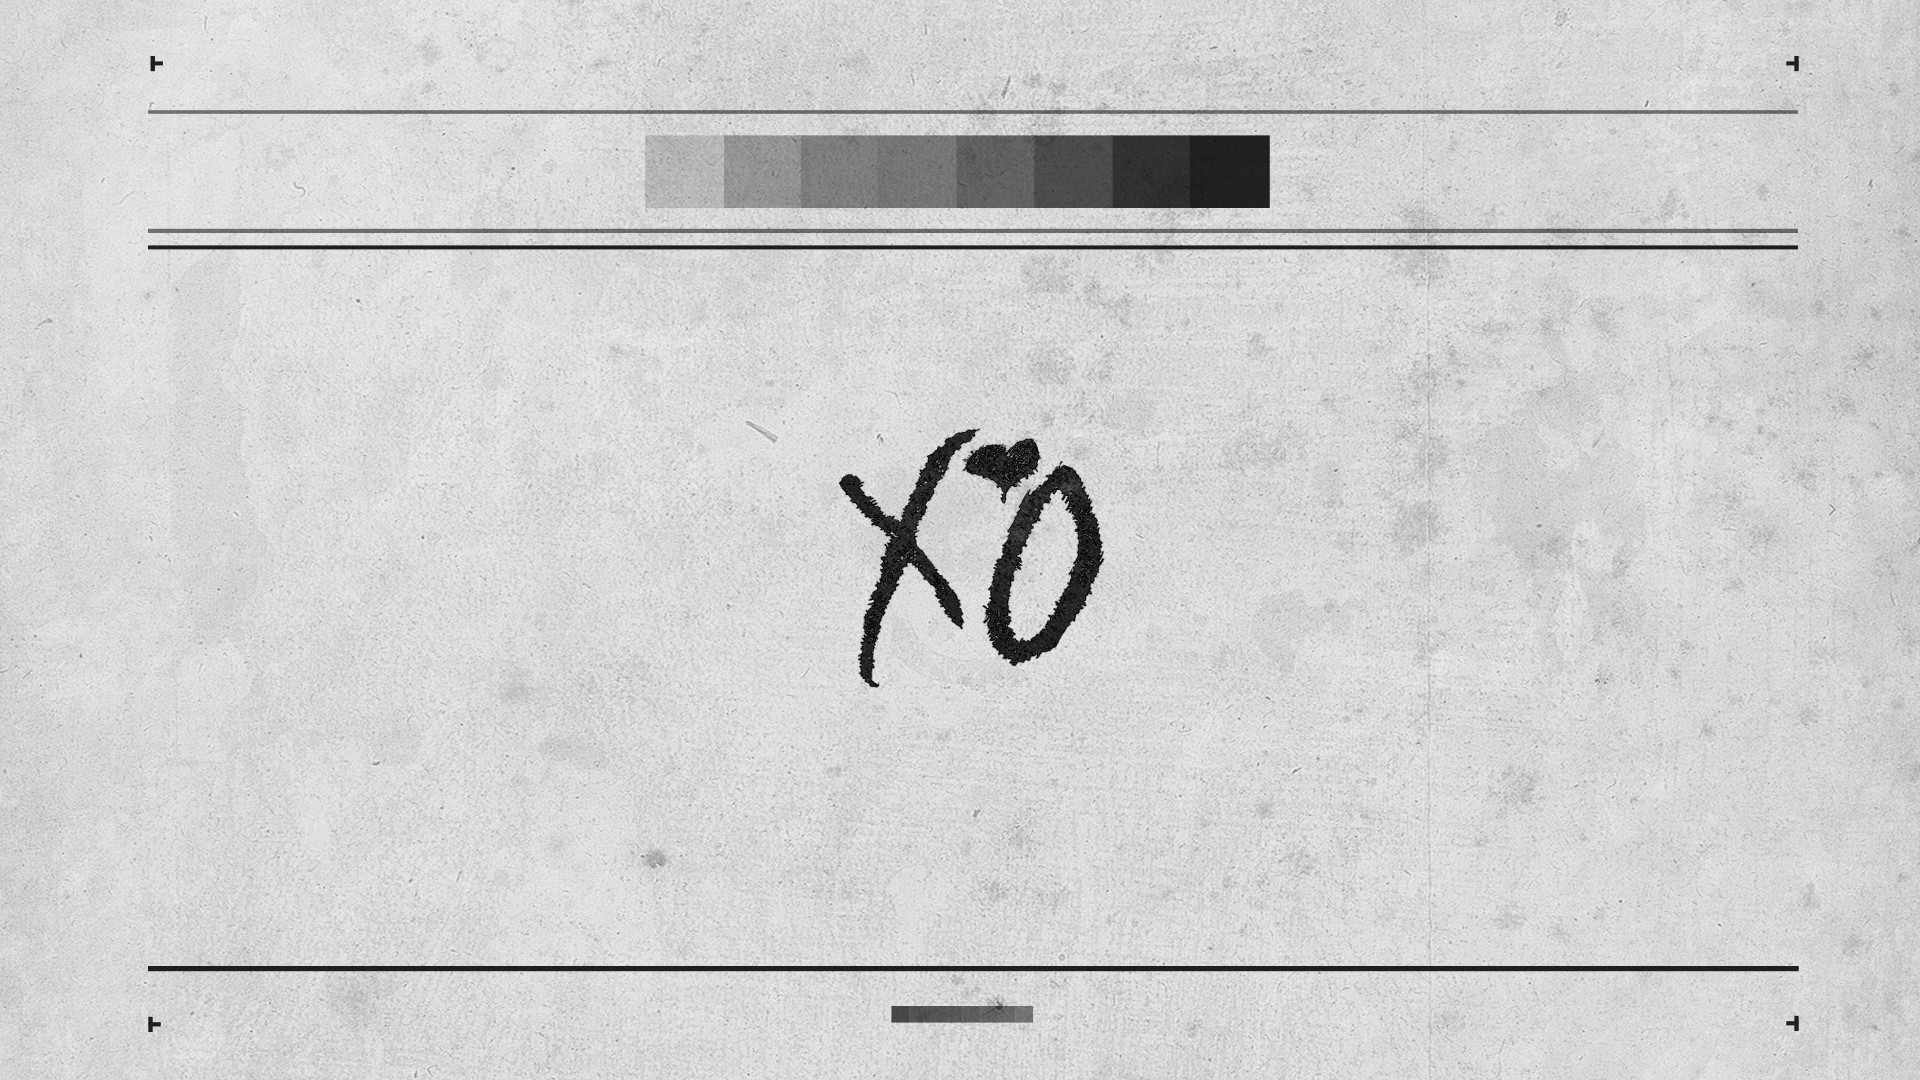 First one is plain and simple: XO